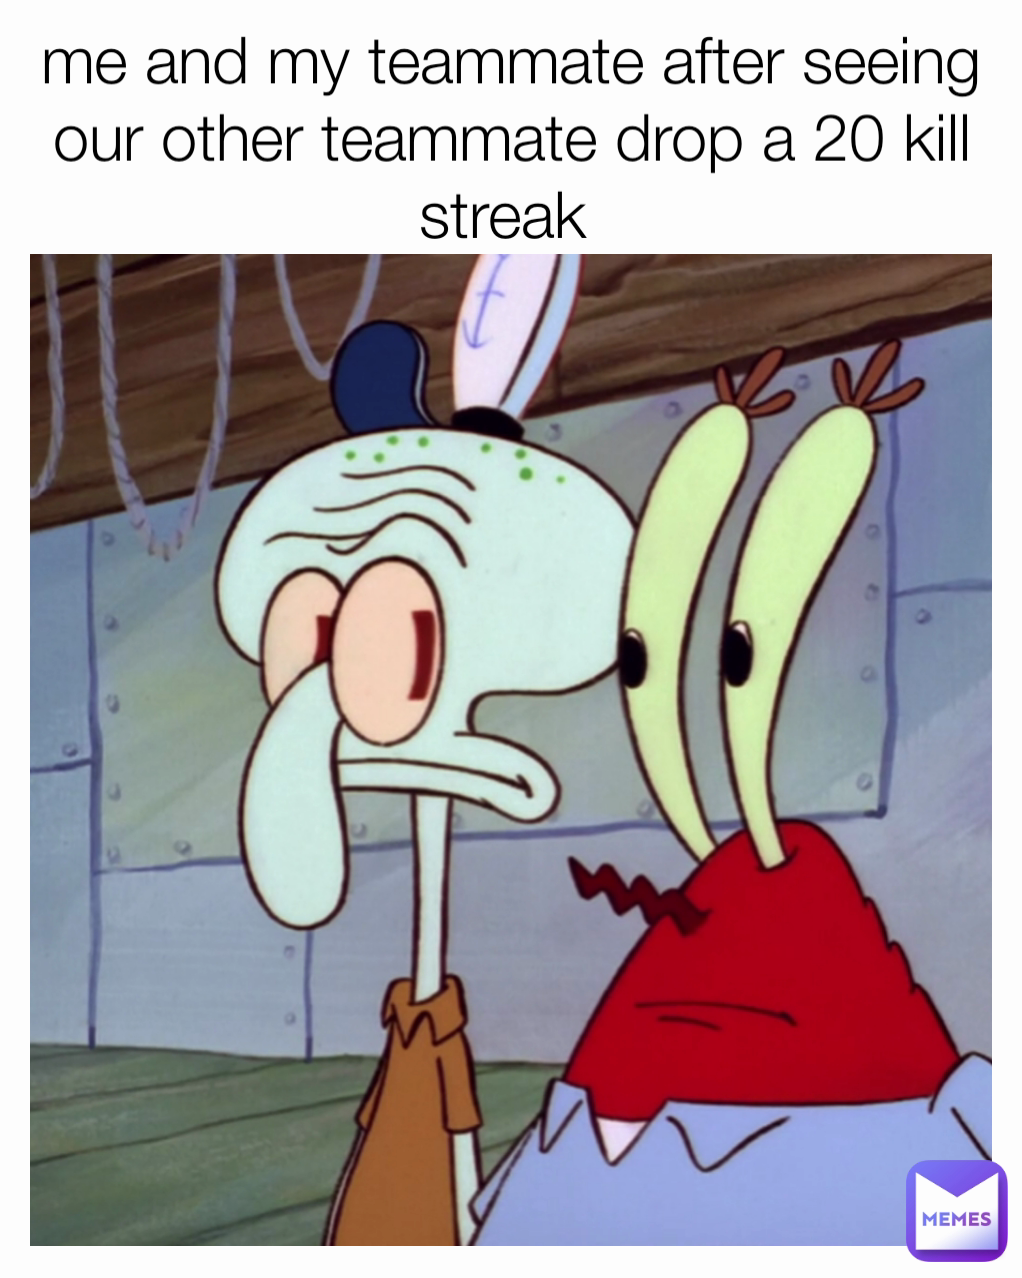 me and my teammate after seeing our other teammate drop a 20 kill streak 